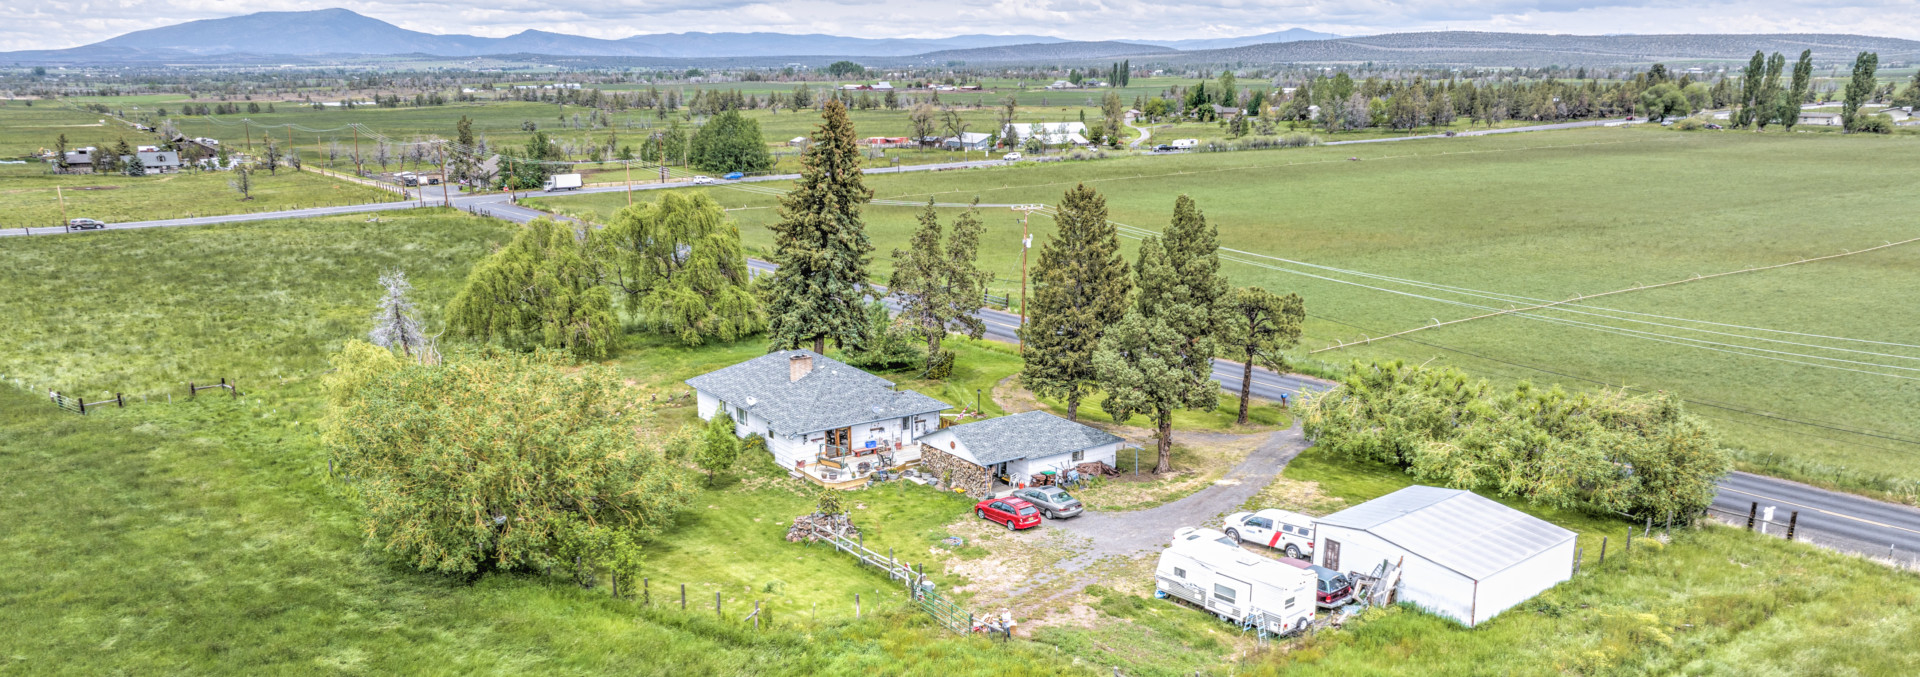 oregon property for sale three sisters view ranch